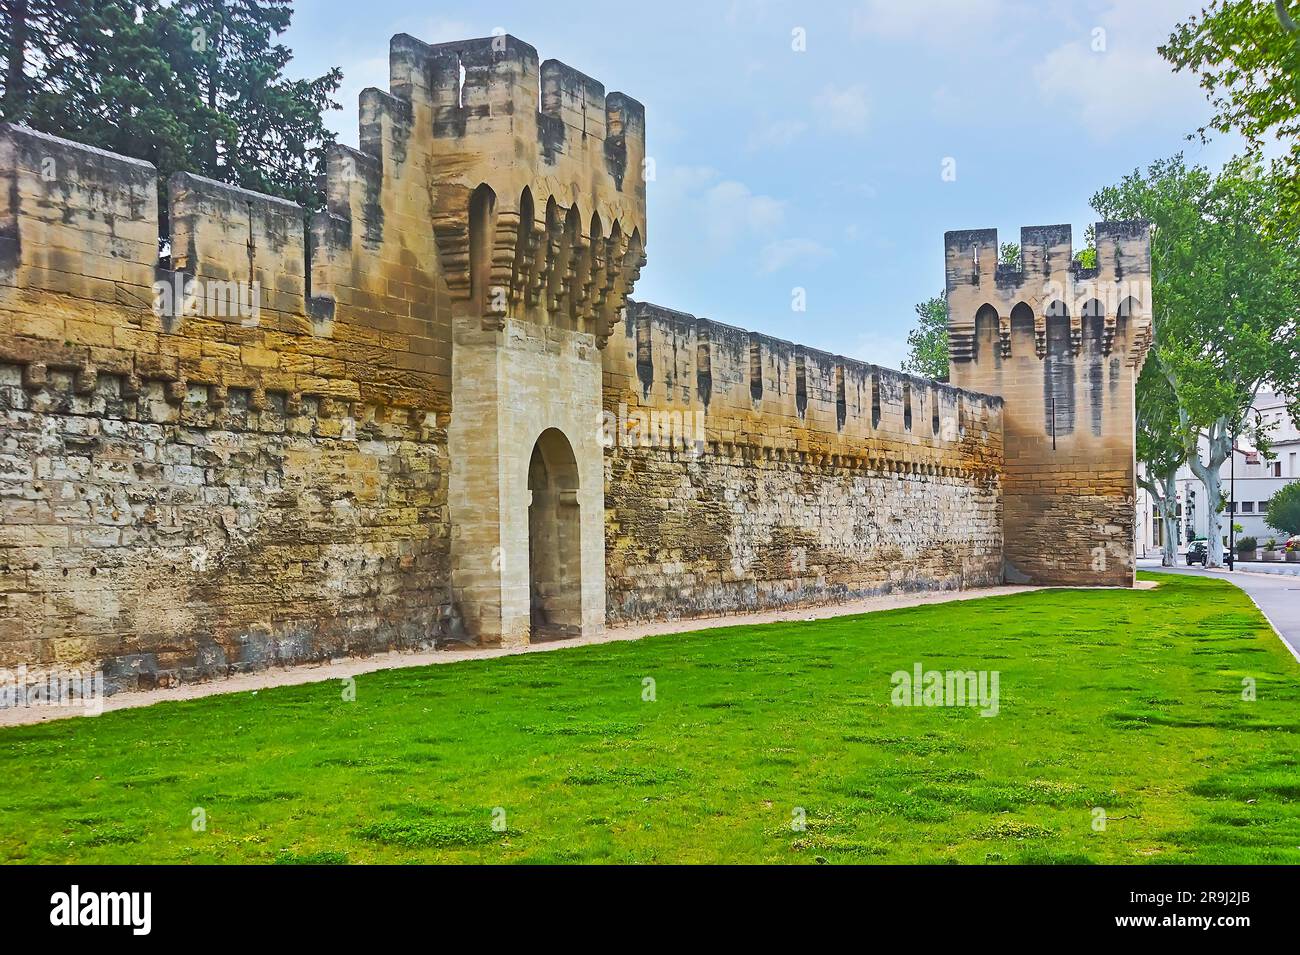 The medieval stone city wall with big battlements and rectangular towers, Avignon, France Stock Photo